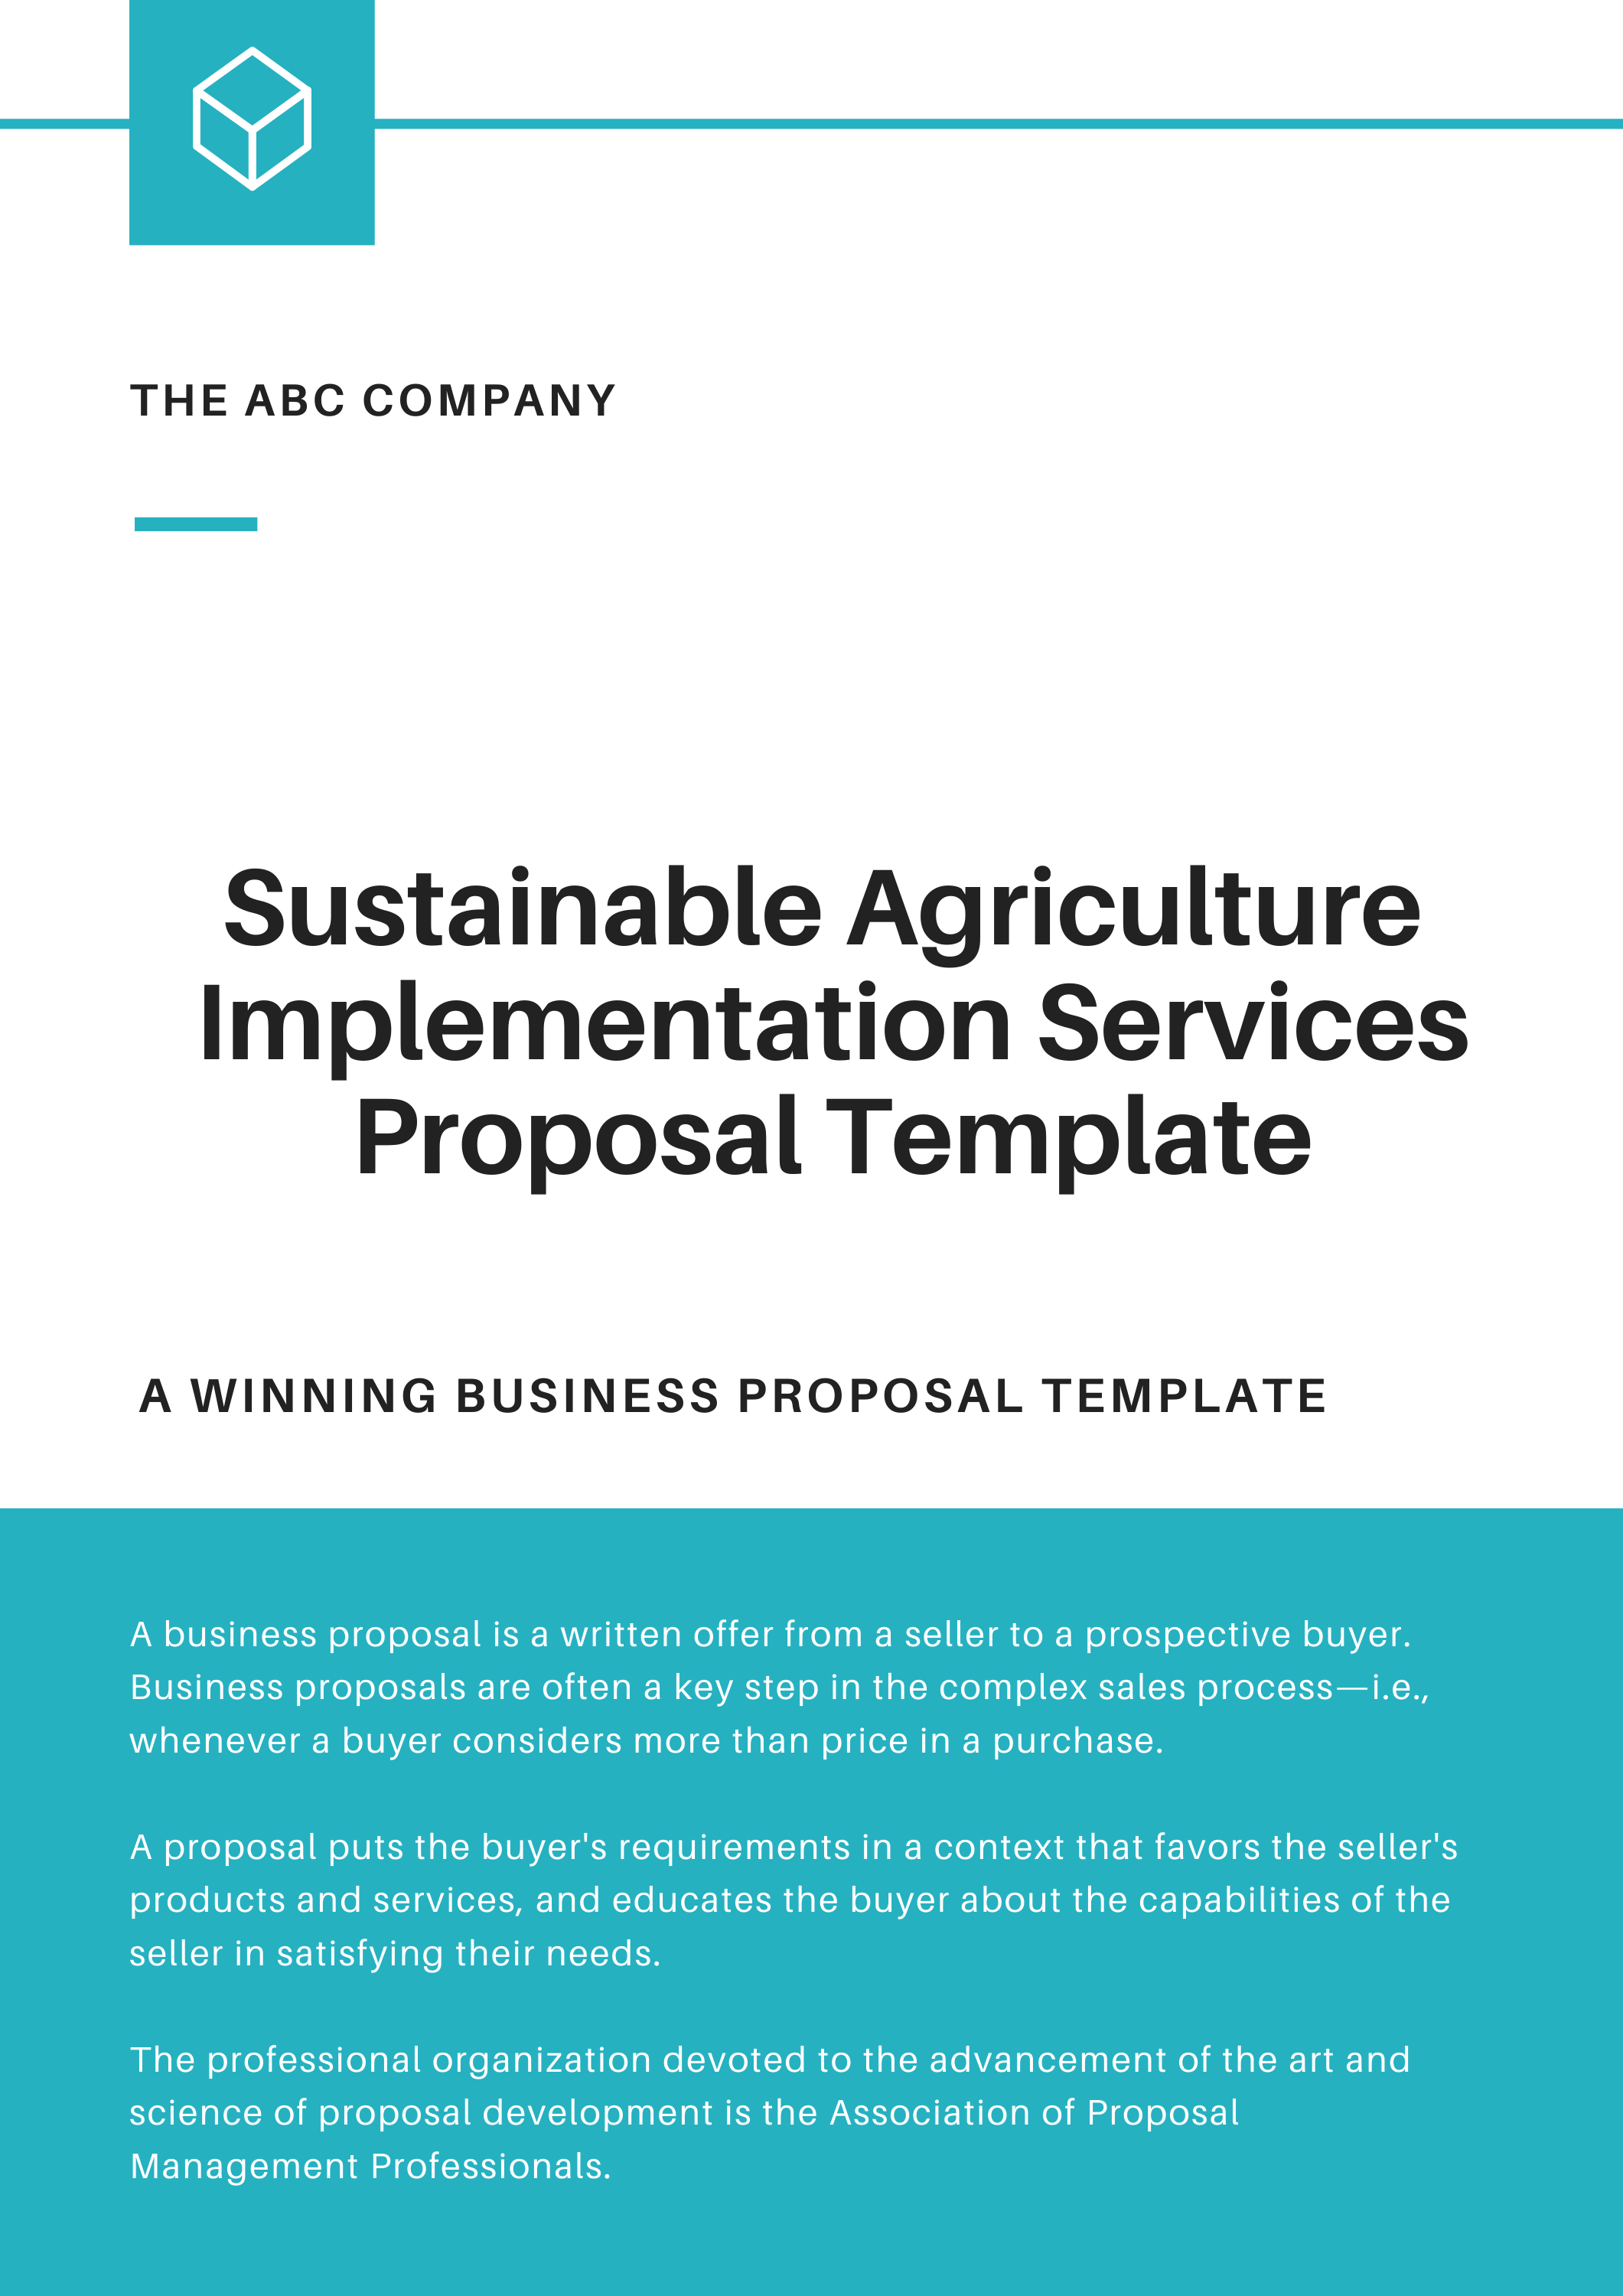 research proposal on sustainable agriculture